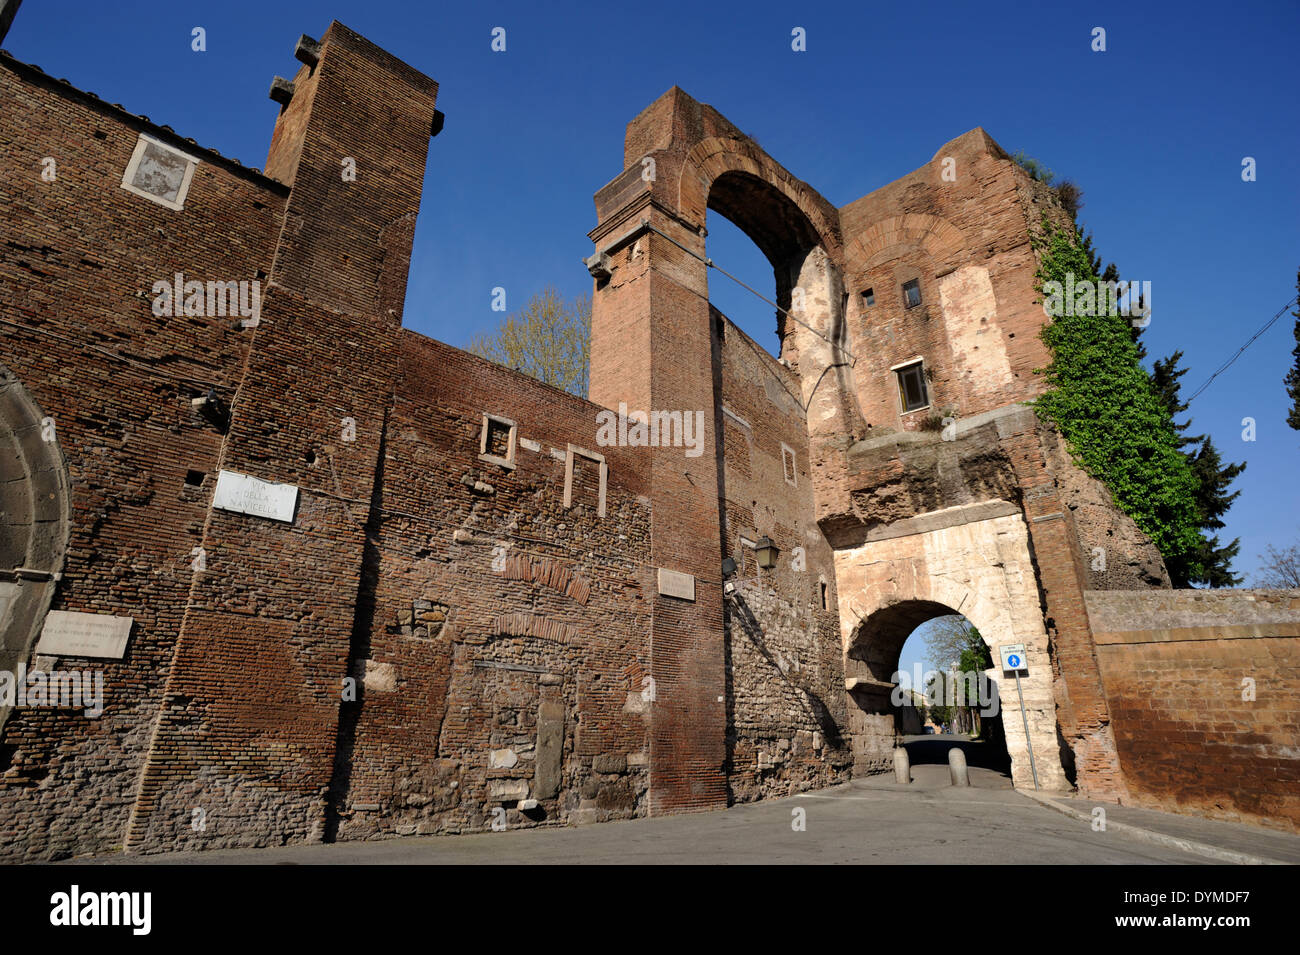 Italy, Rome, Celio, ancient fortifications of the Servian Walls, arch of Dolabella roman gate and Nero aqueduct ruins Stock Photo